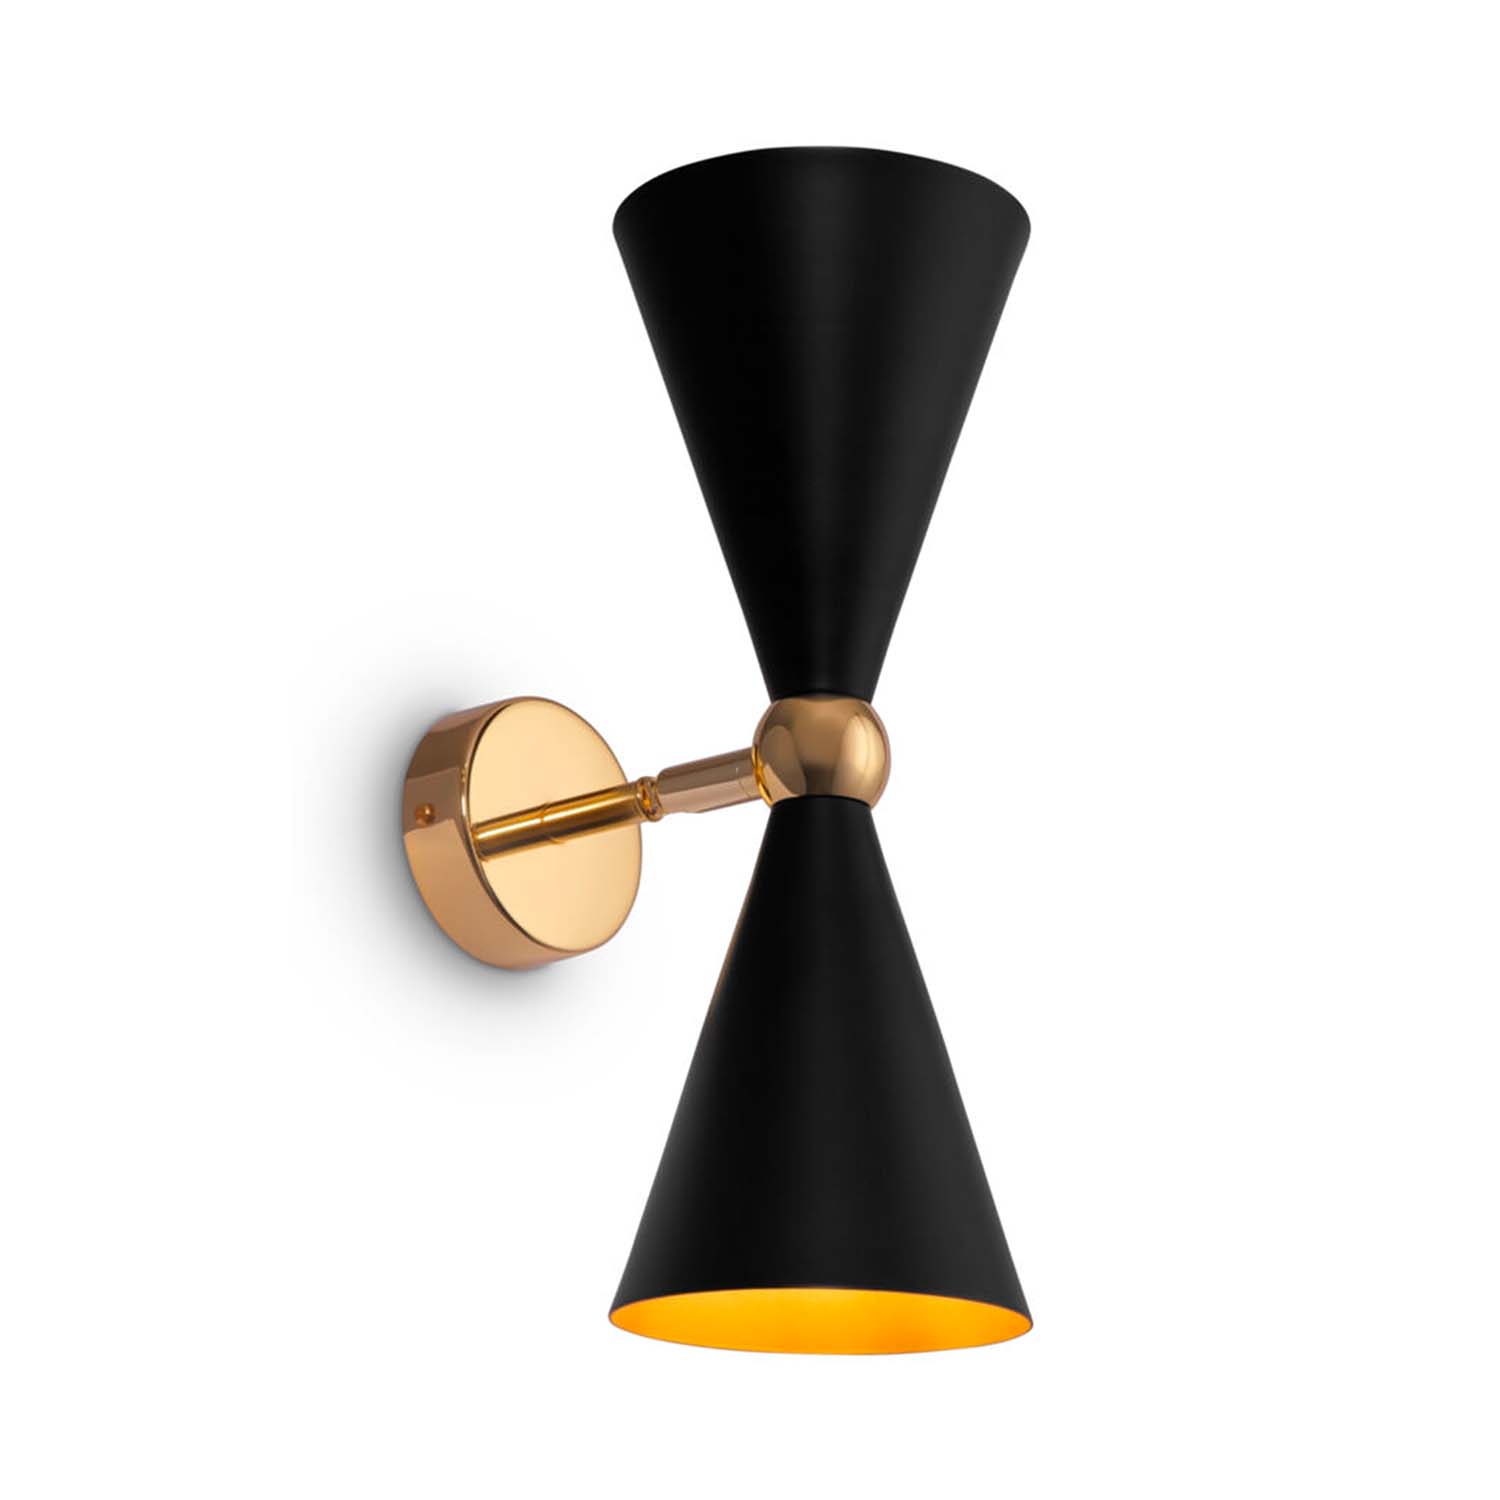 VESPER - Conical black or white and gold wall light